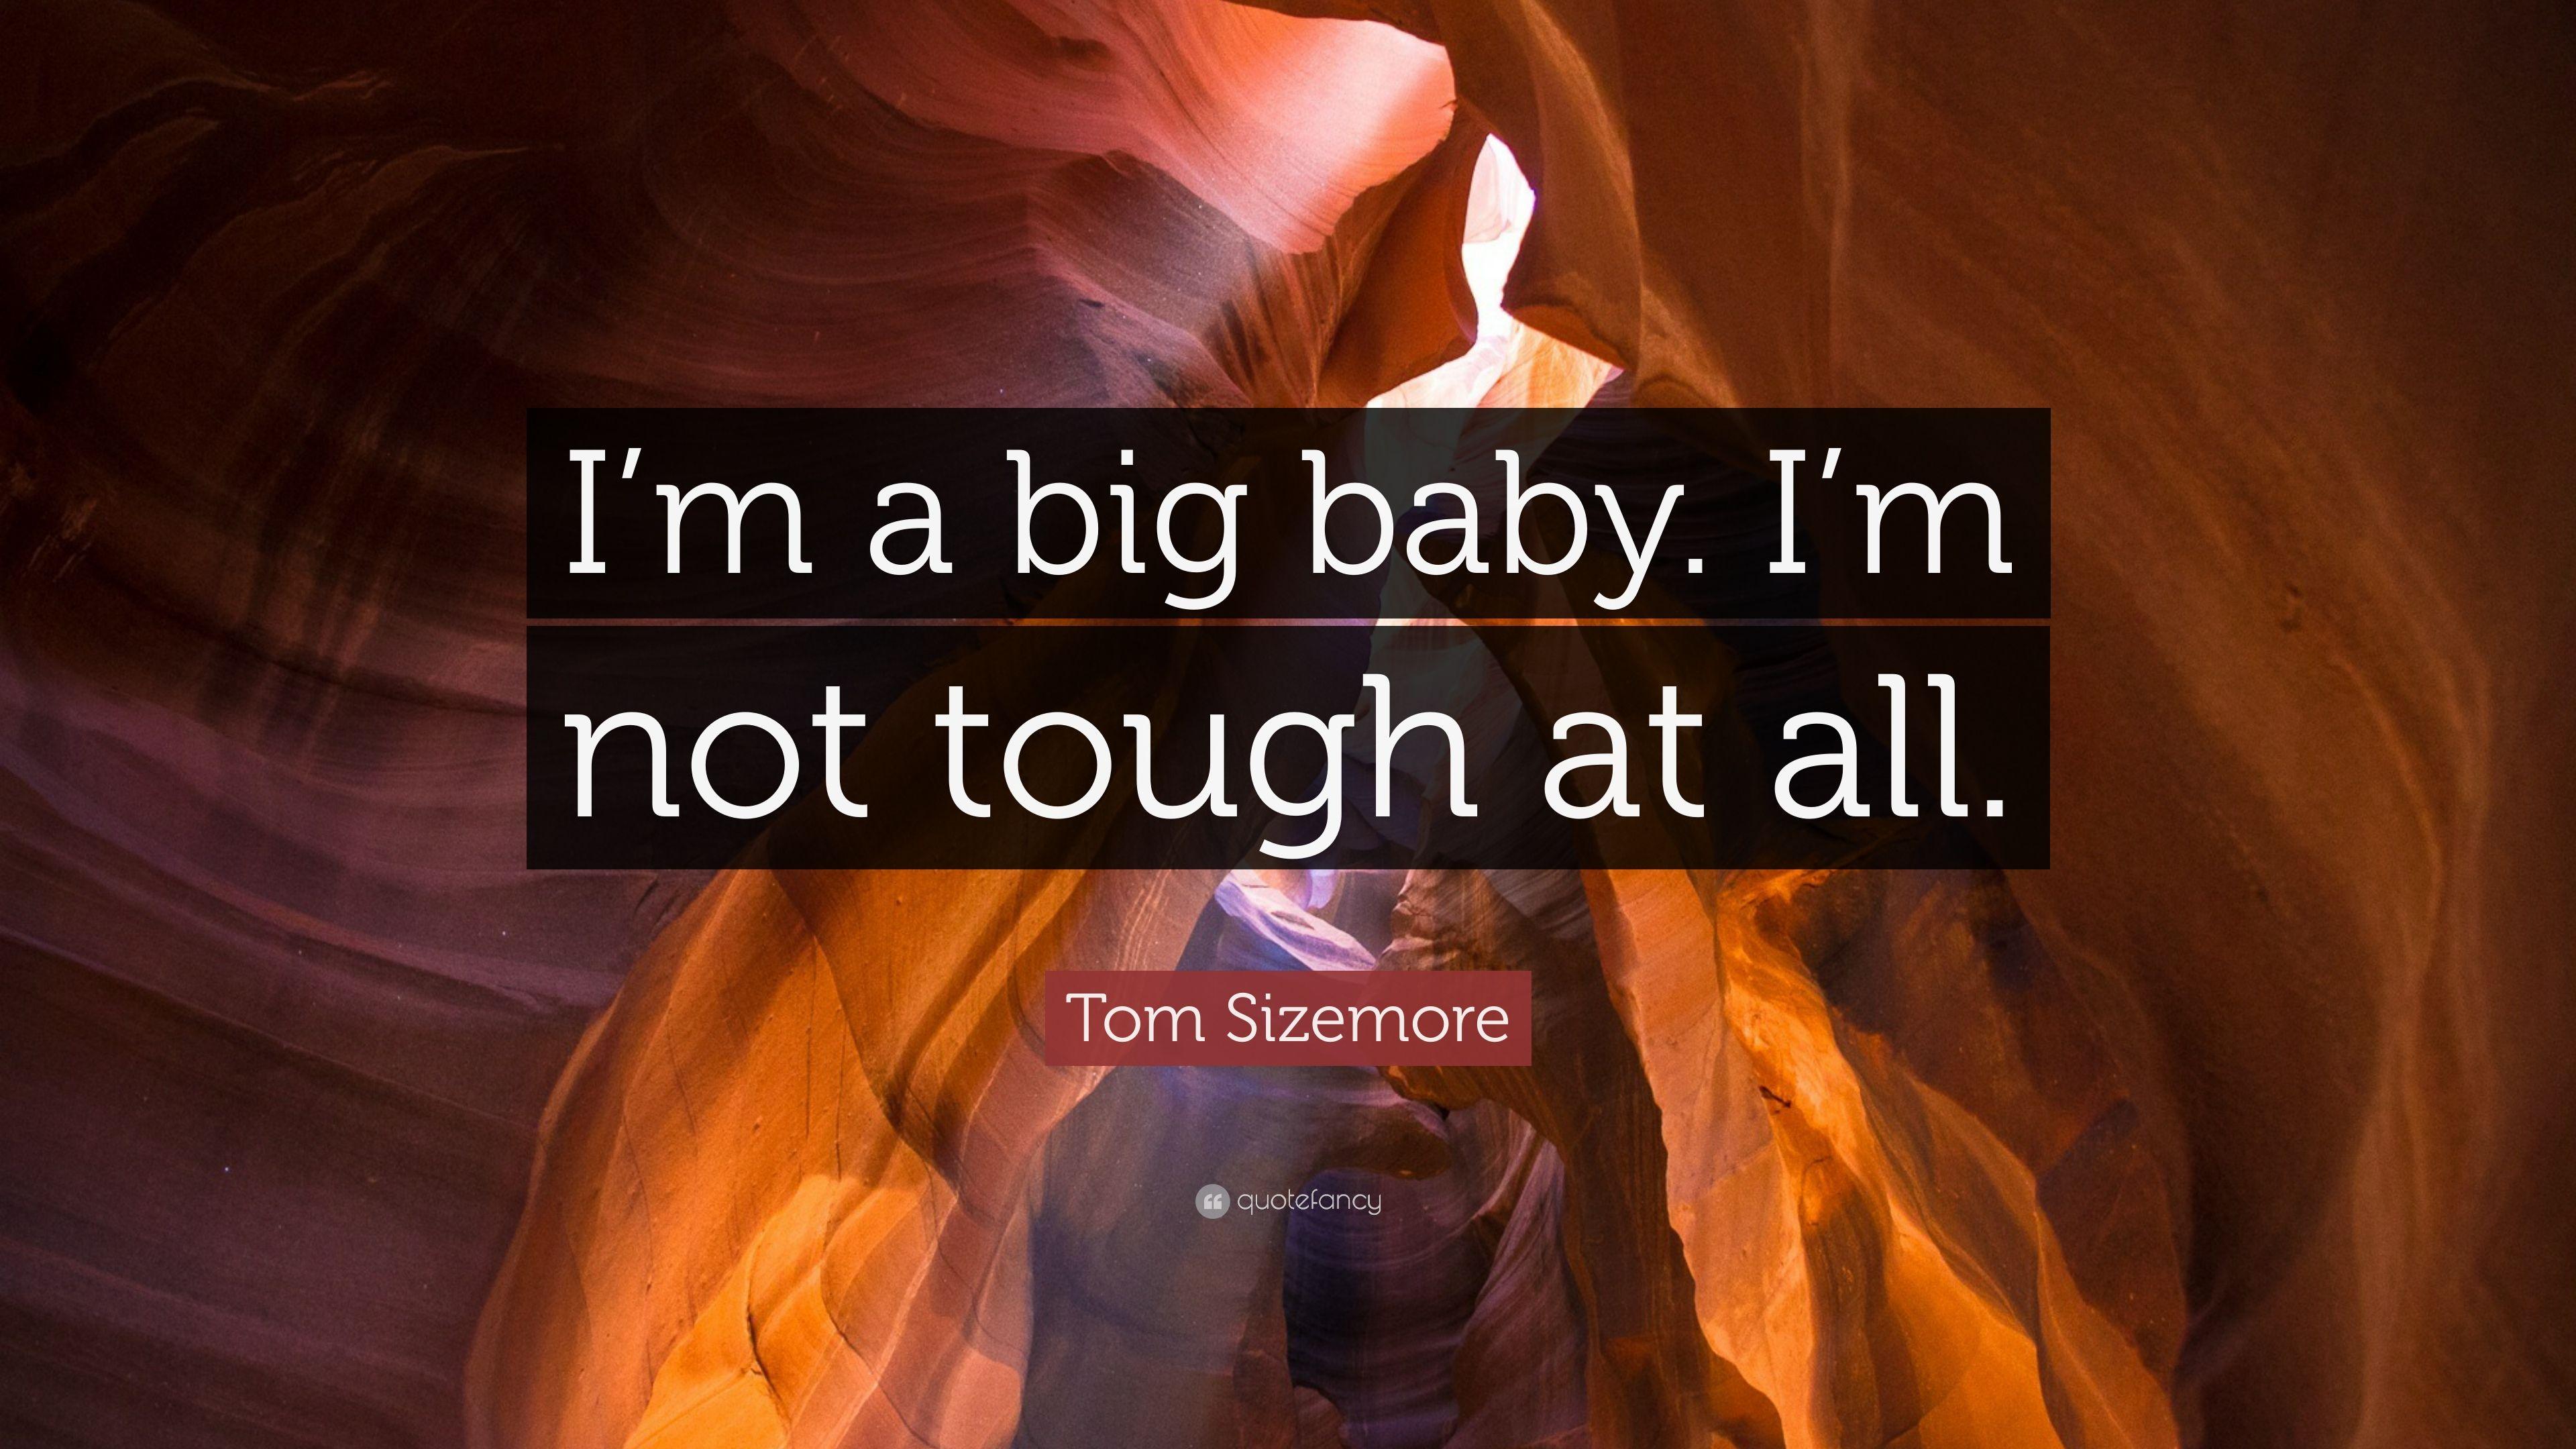 Tom Sizemore Quote: “I'm a big baby. I'm not tough at all.” 5